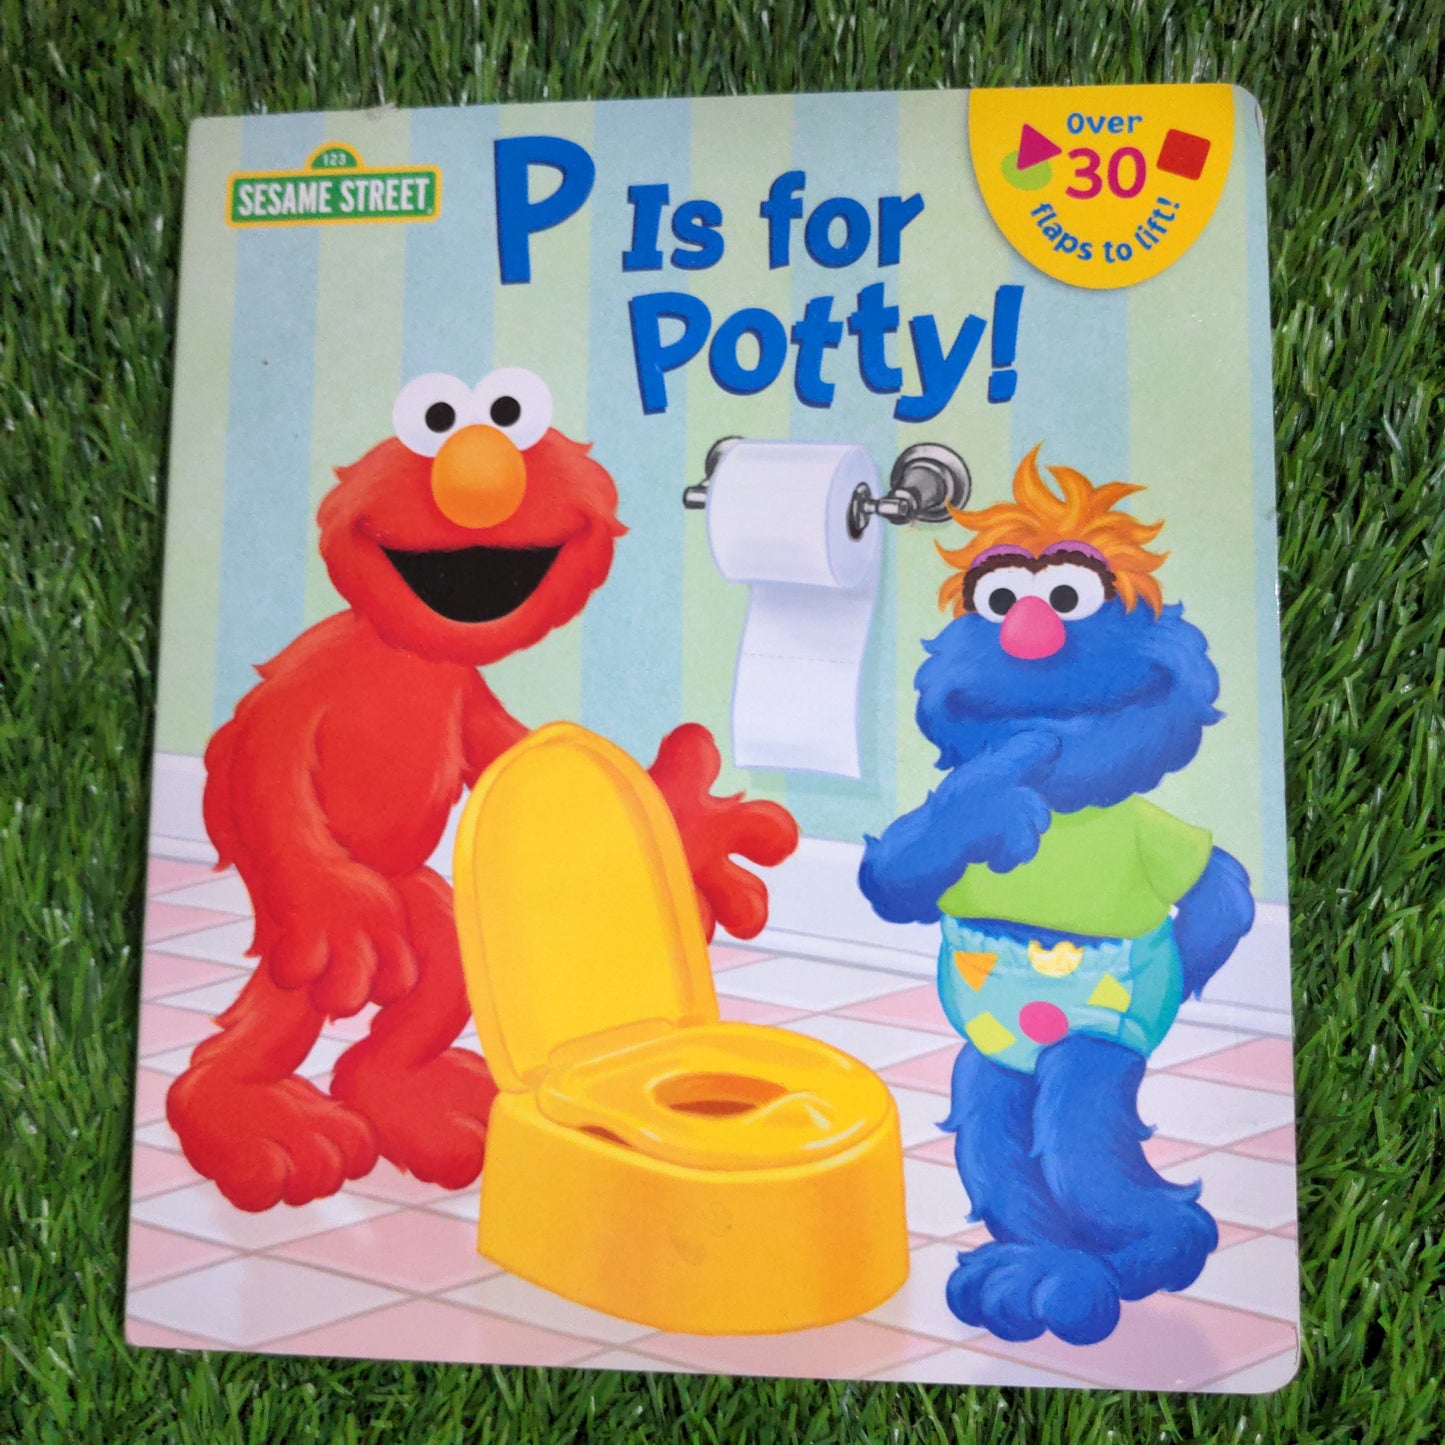 P is for Potty! (Sesame Street)